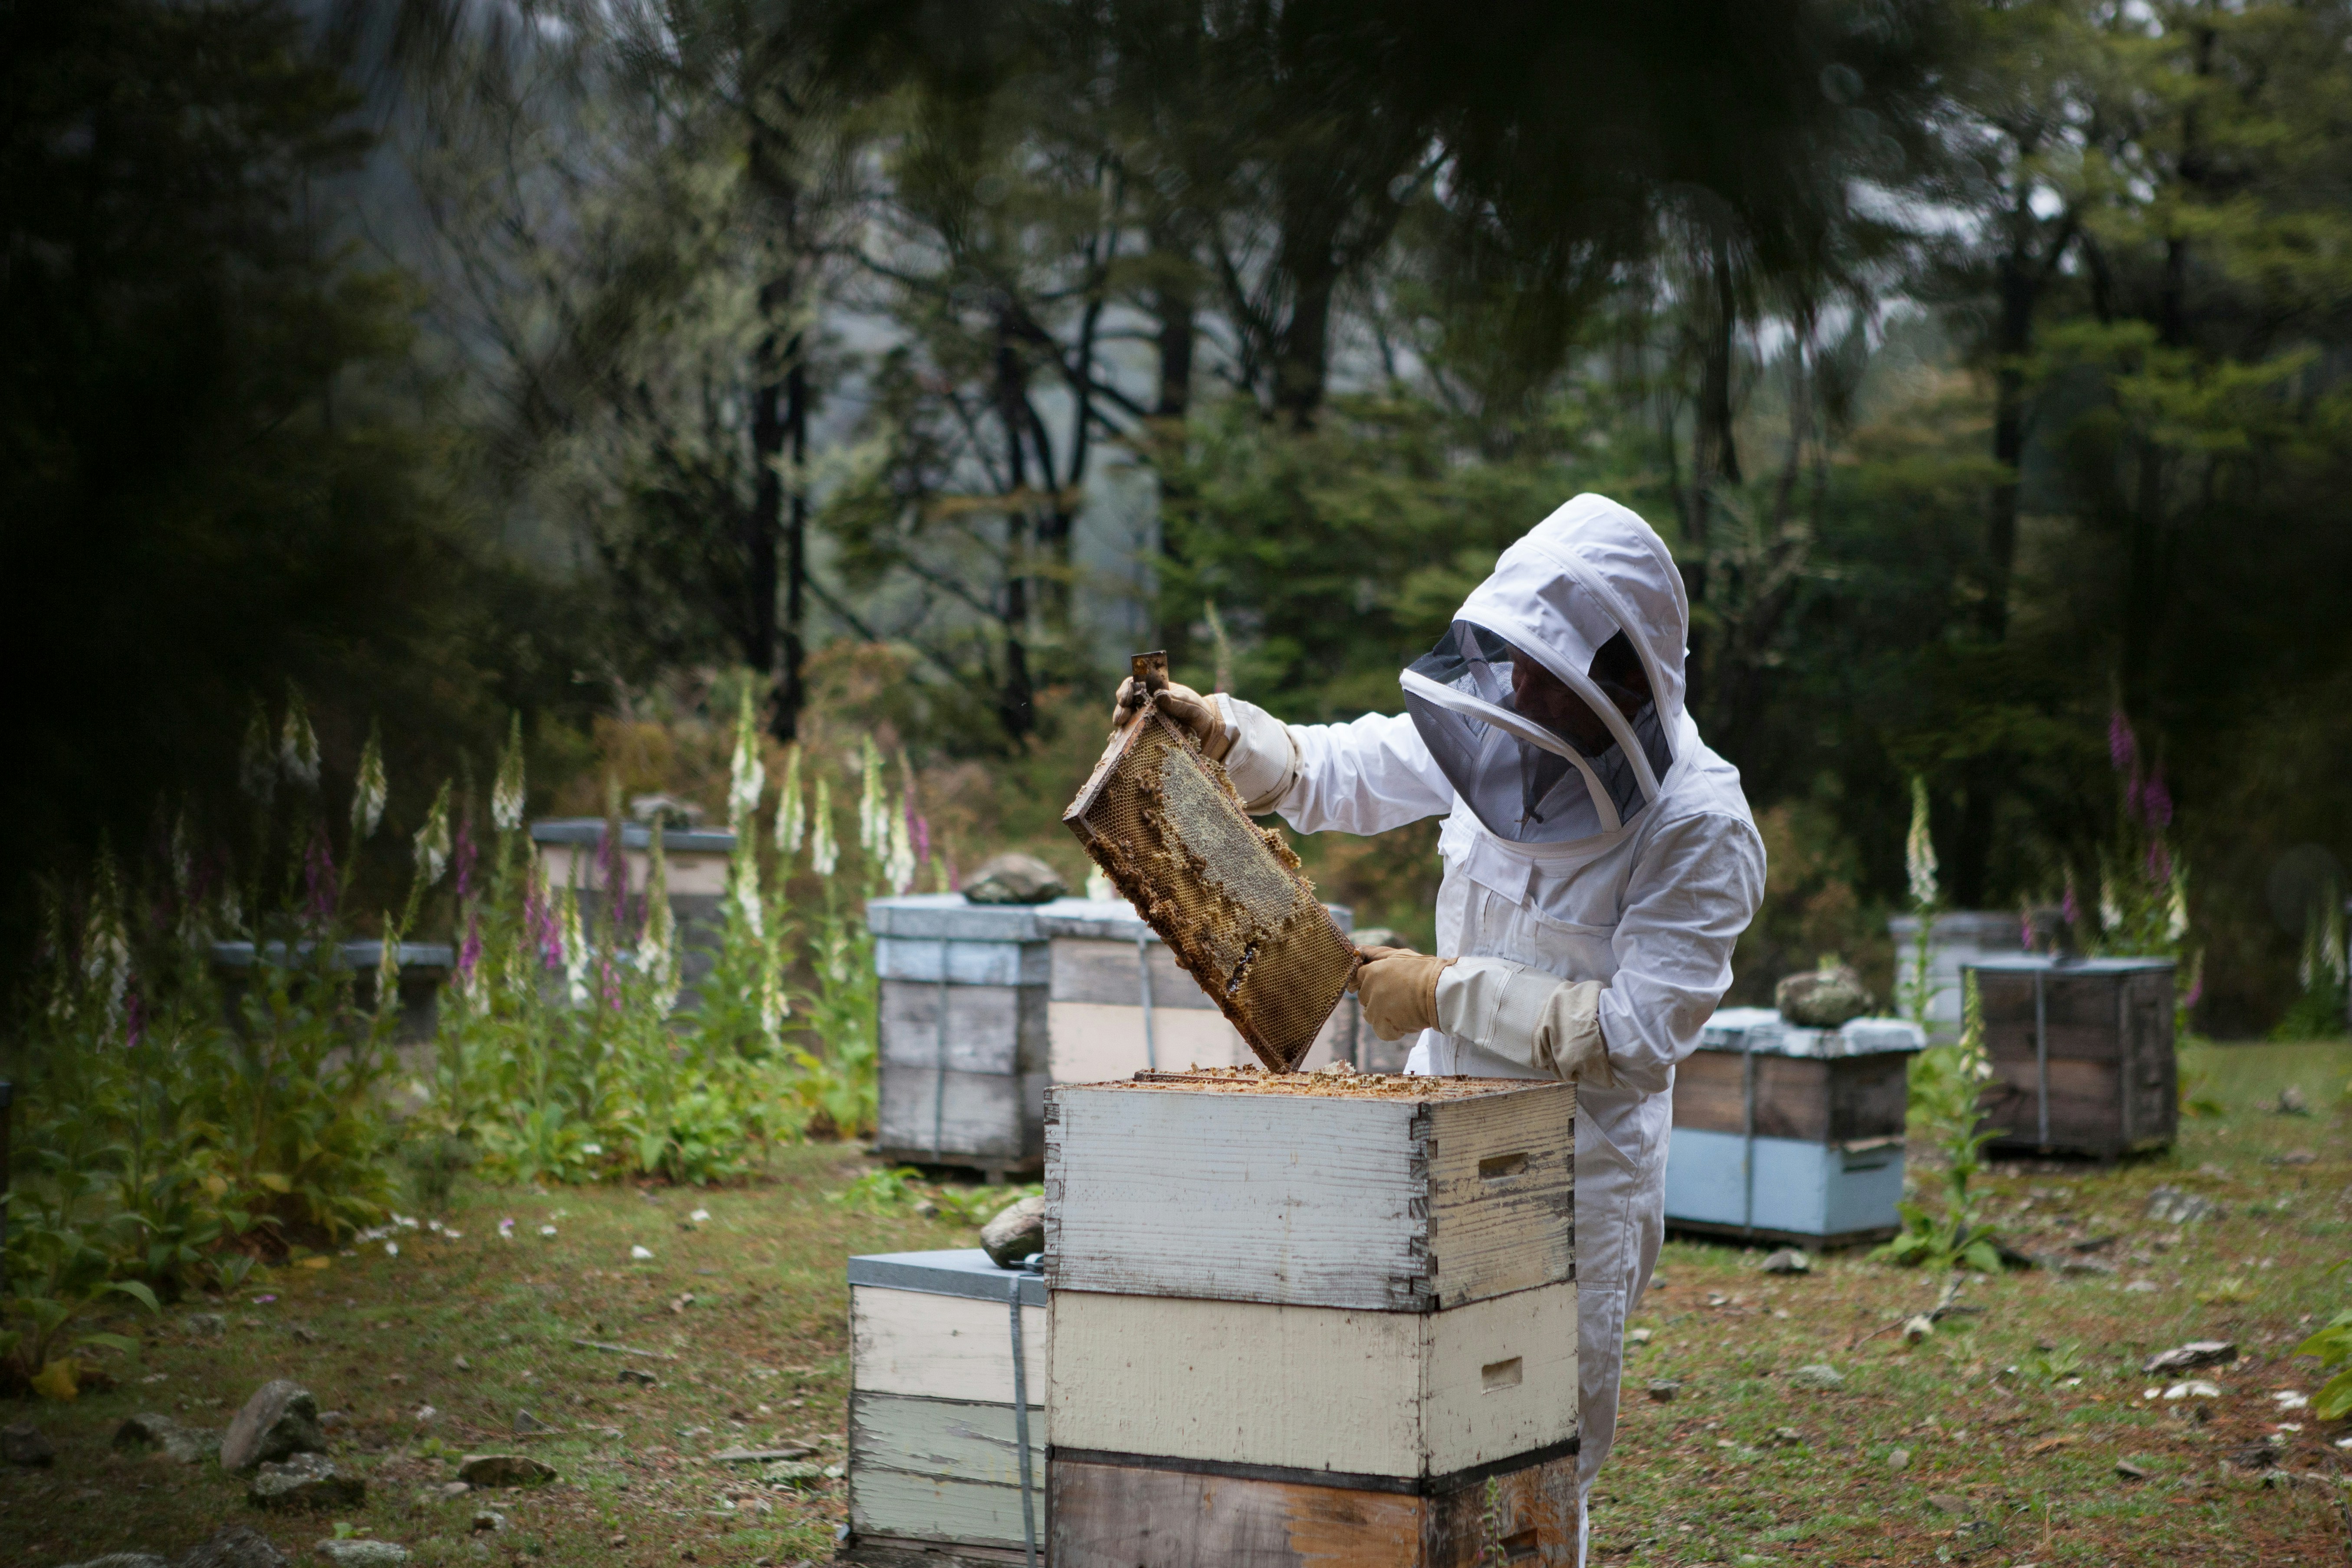 Beekeeper inspecting hive frame at apiary with bee boxes in a green field